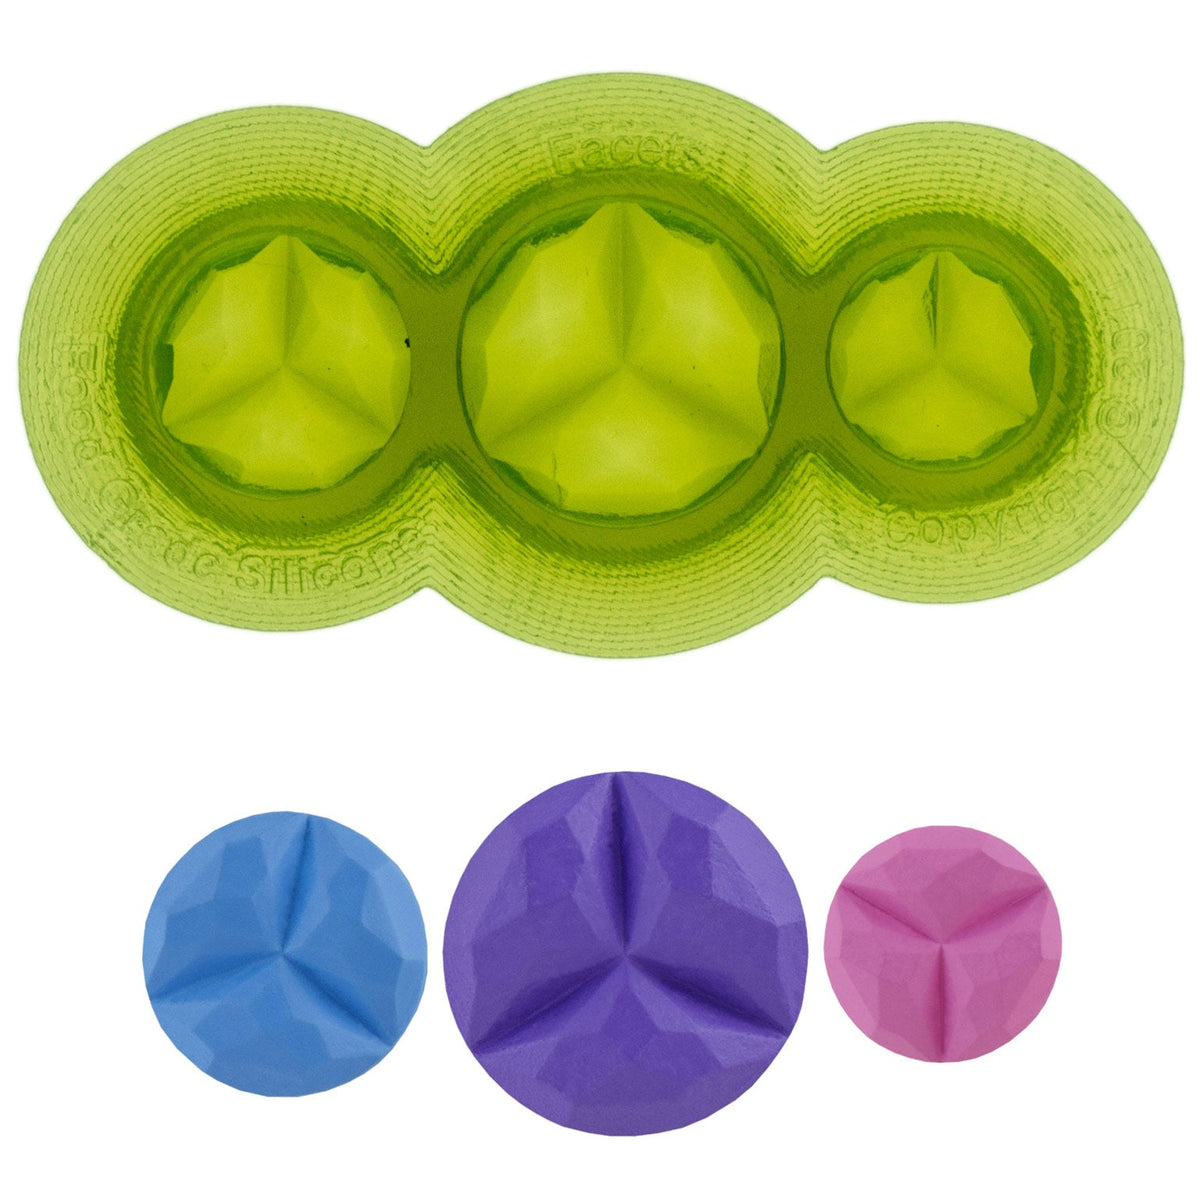 Facets Button Food Safe Silicone Mold for Fondant Cake Decorating by Marvelous Molds